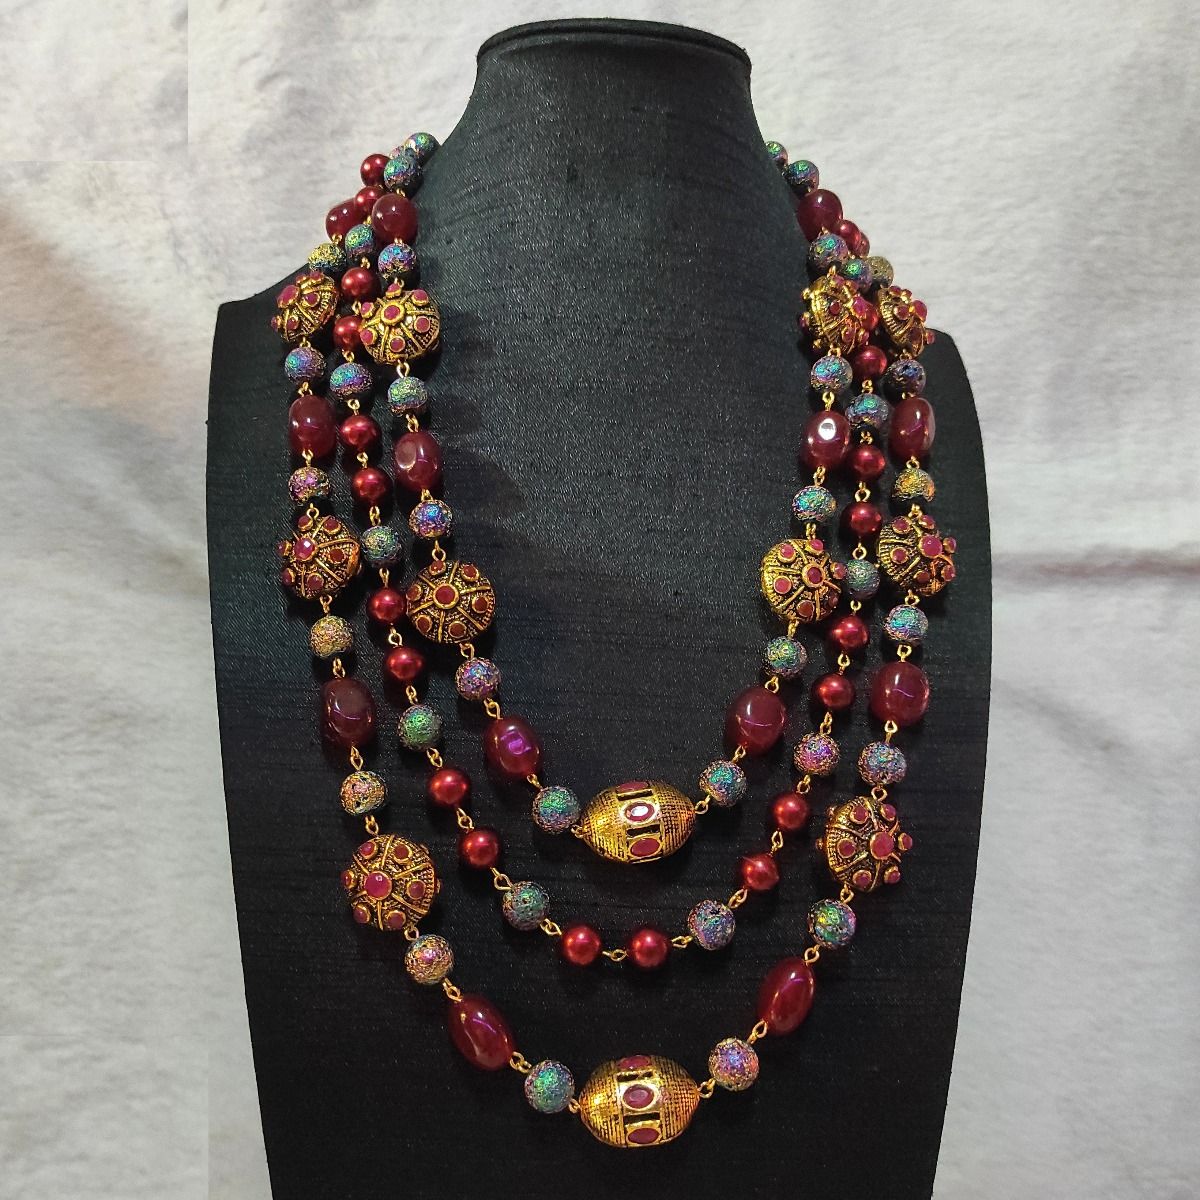 High Quality Joypuri Beads, Multicolor Pearl & Stone Necklace